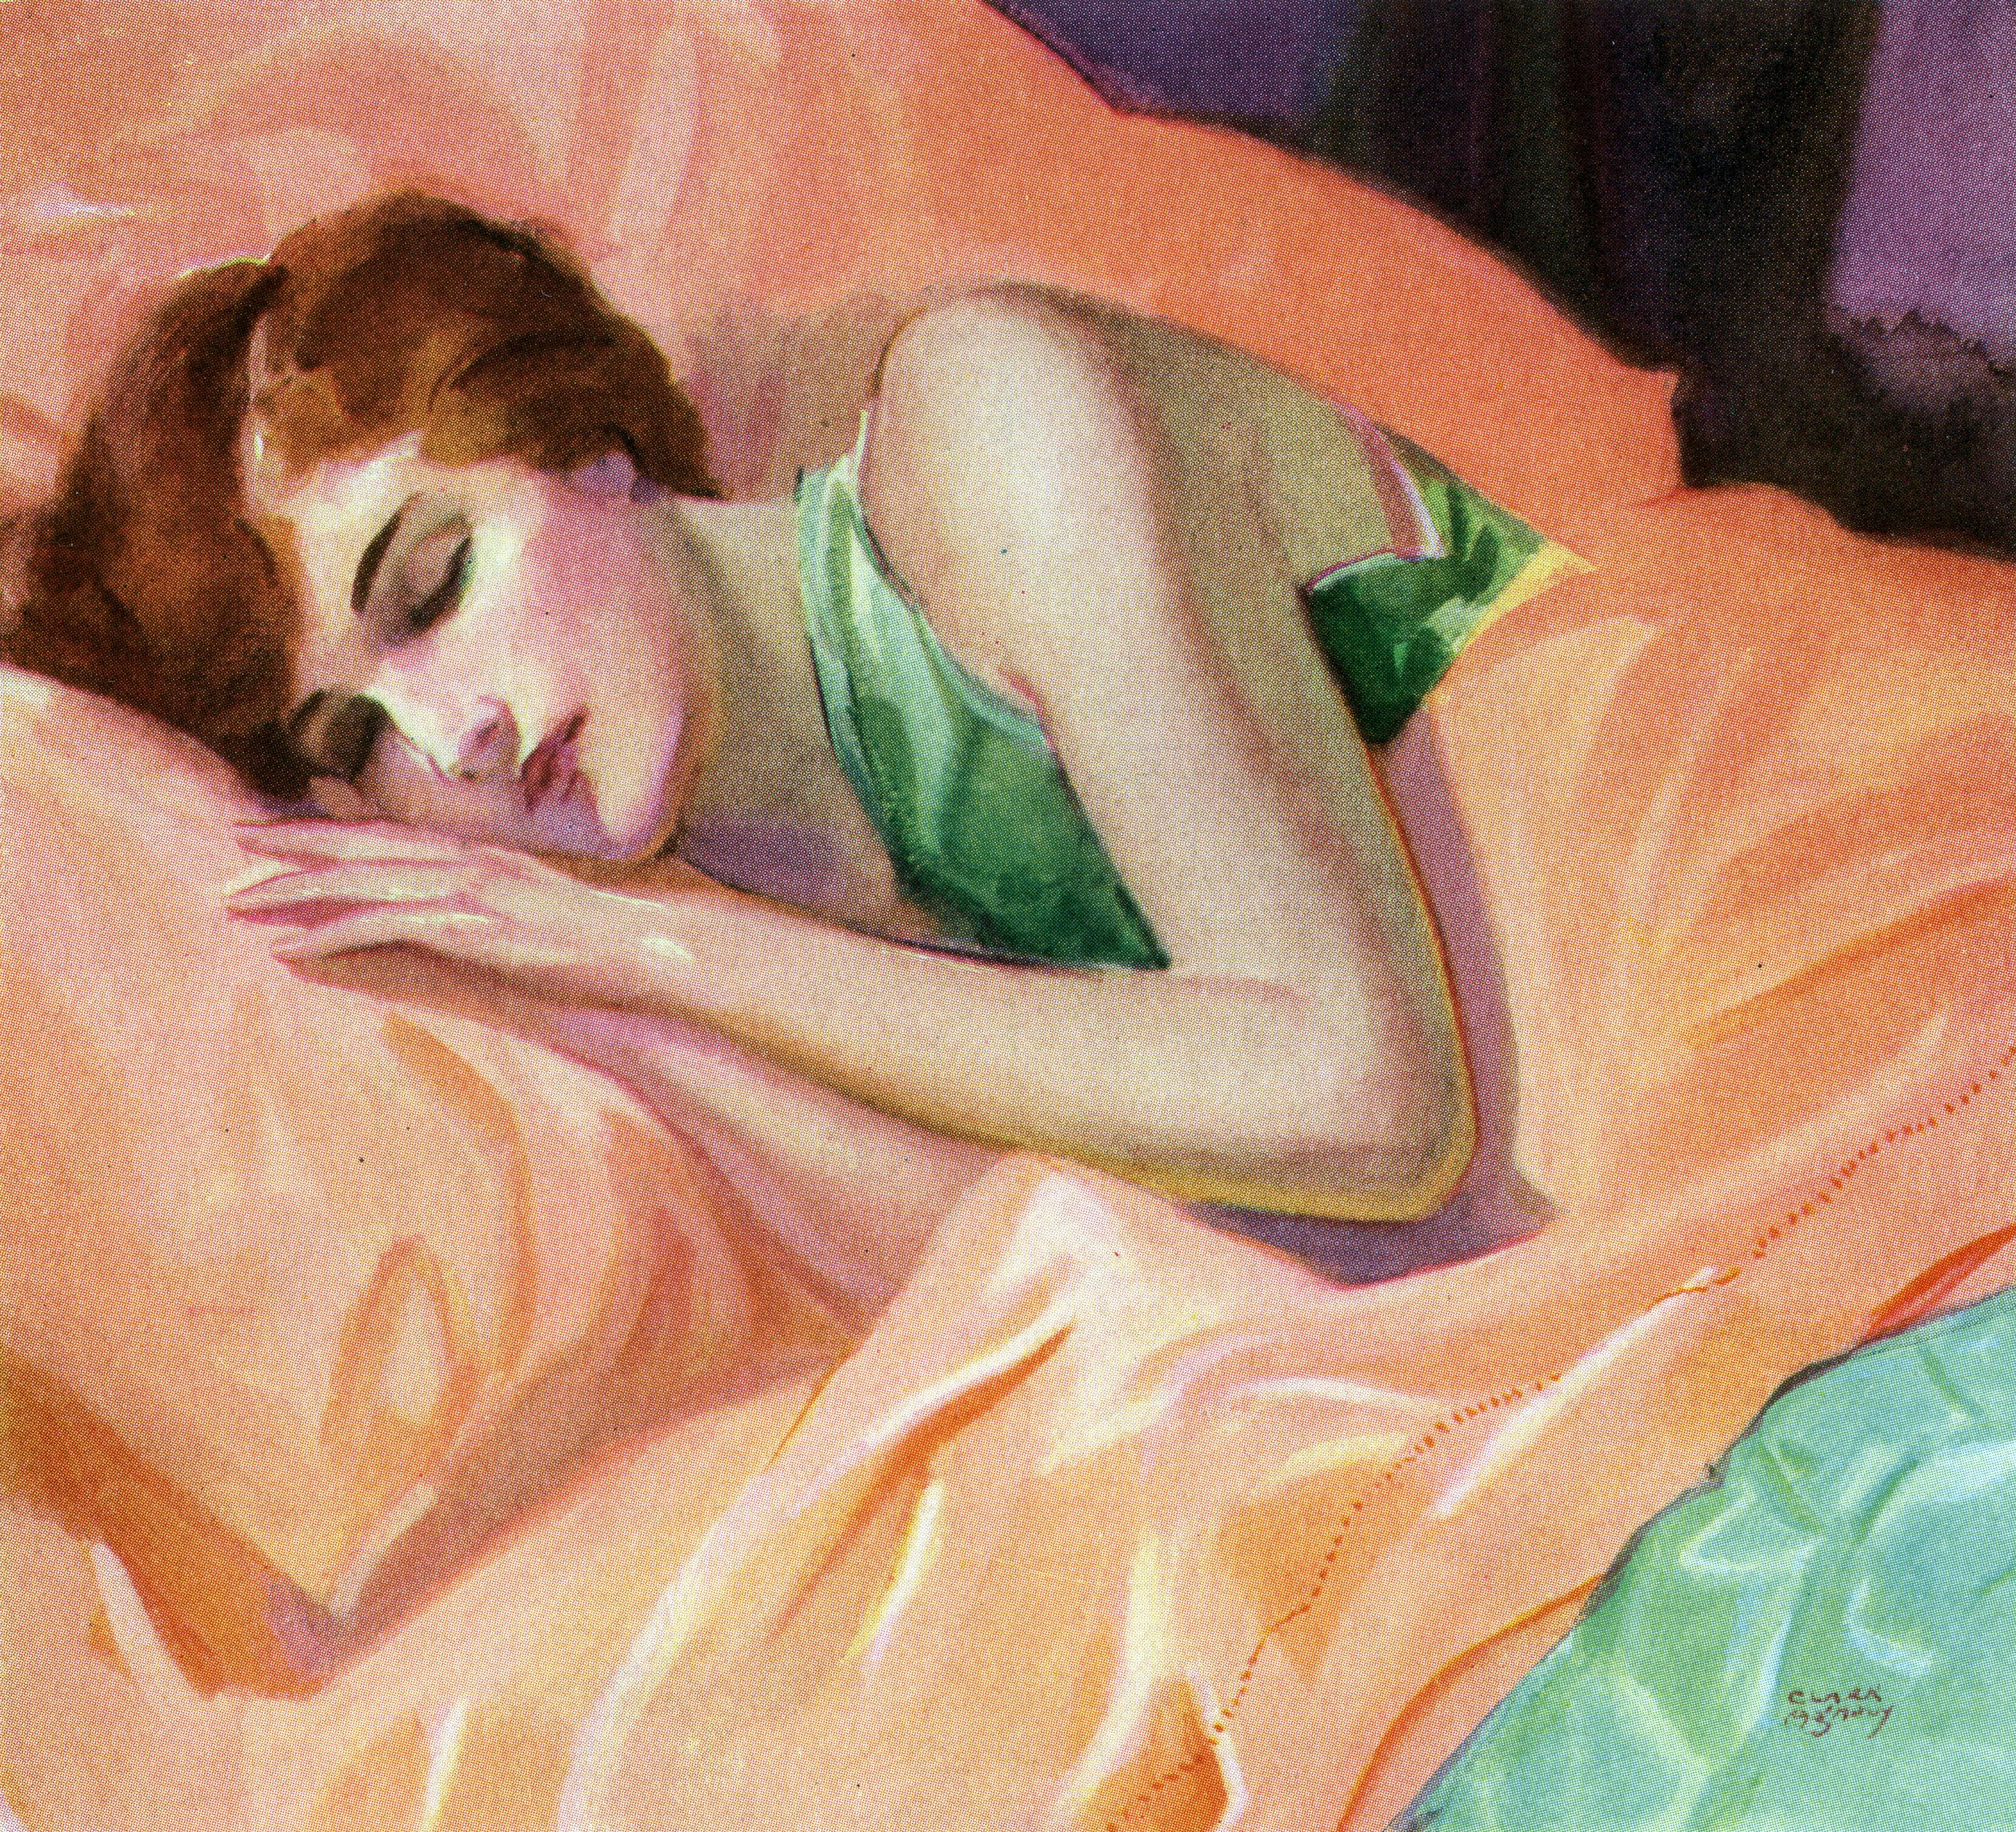 Woman wears green top and sleeps on peach colored sheets.